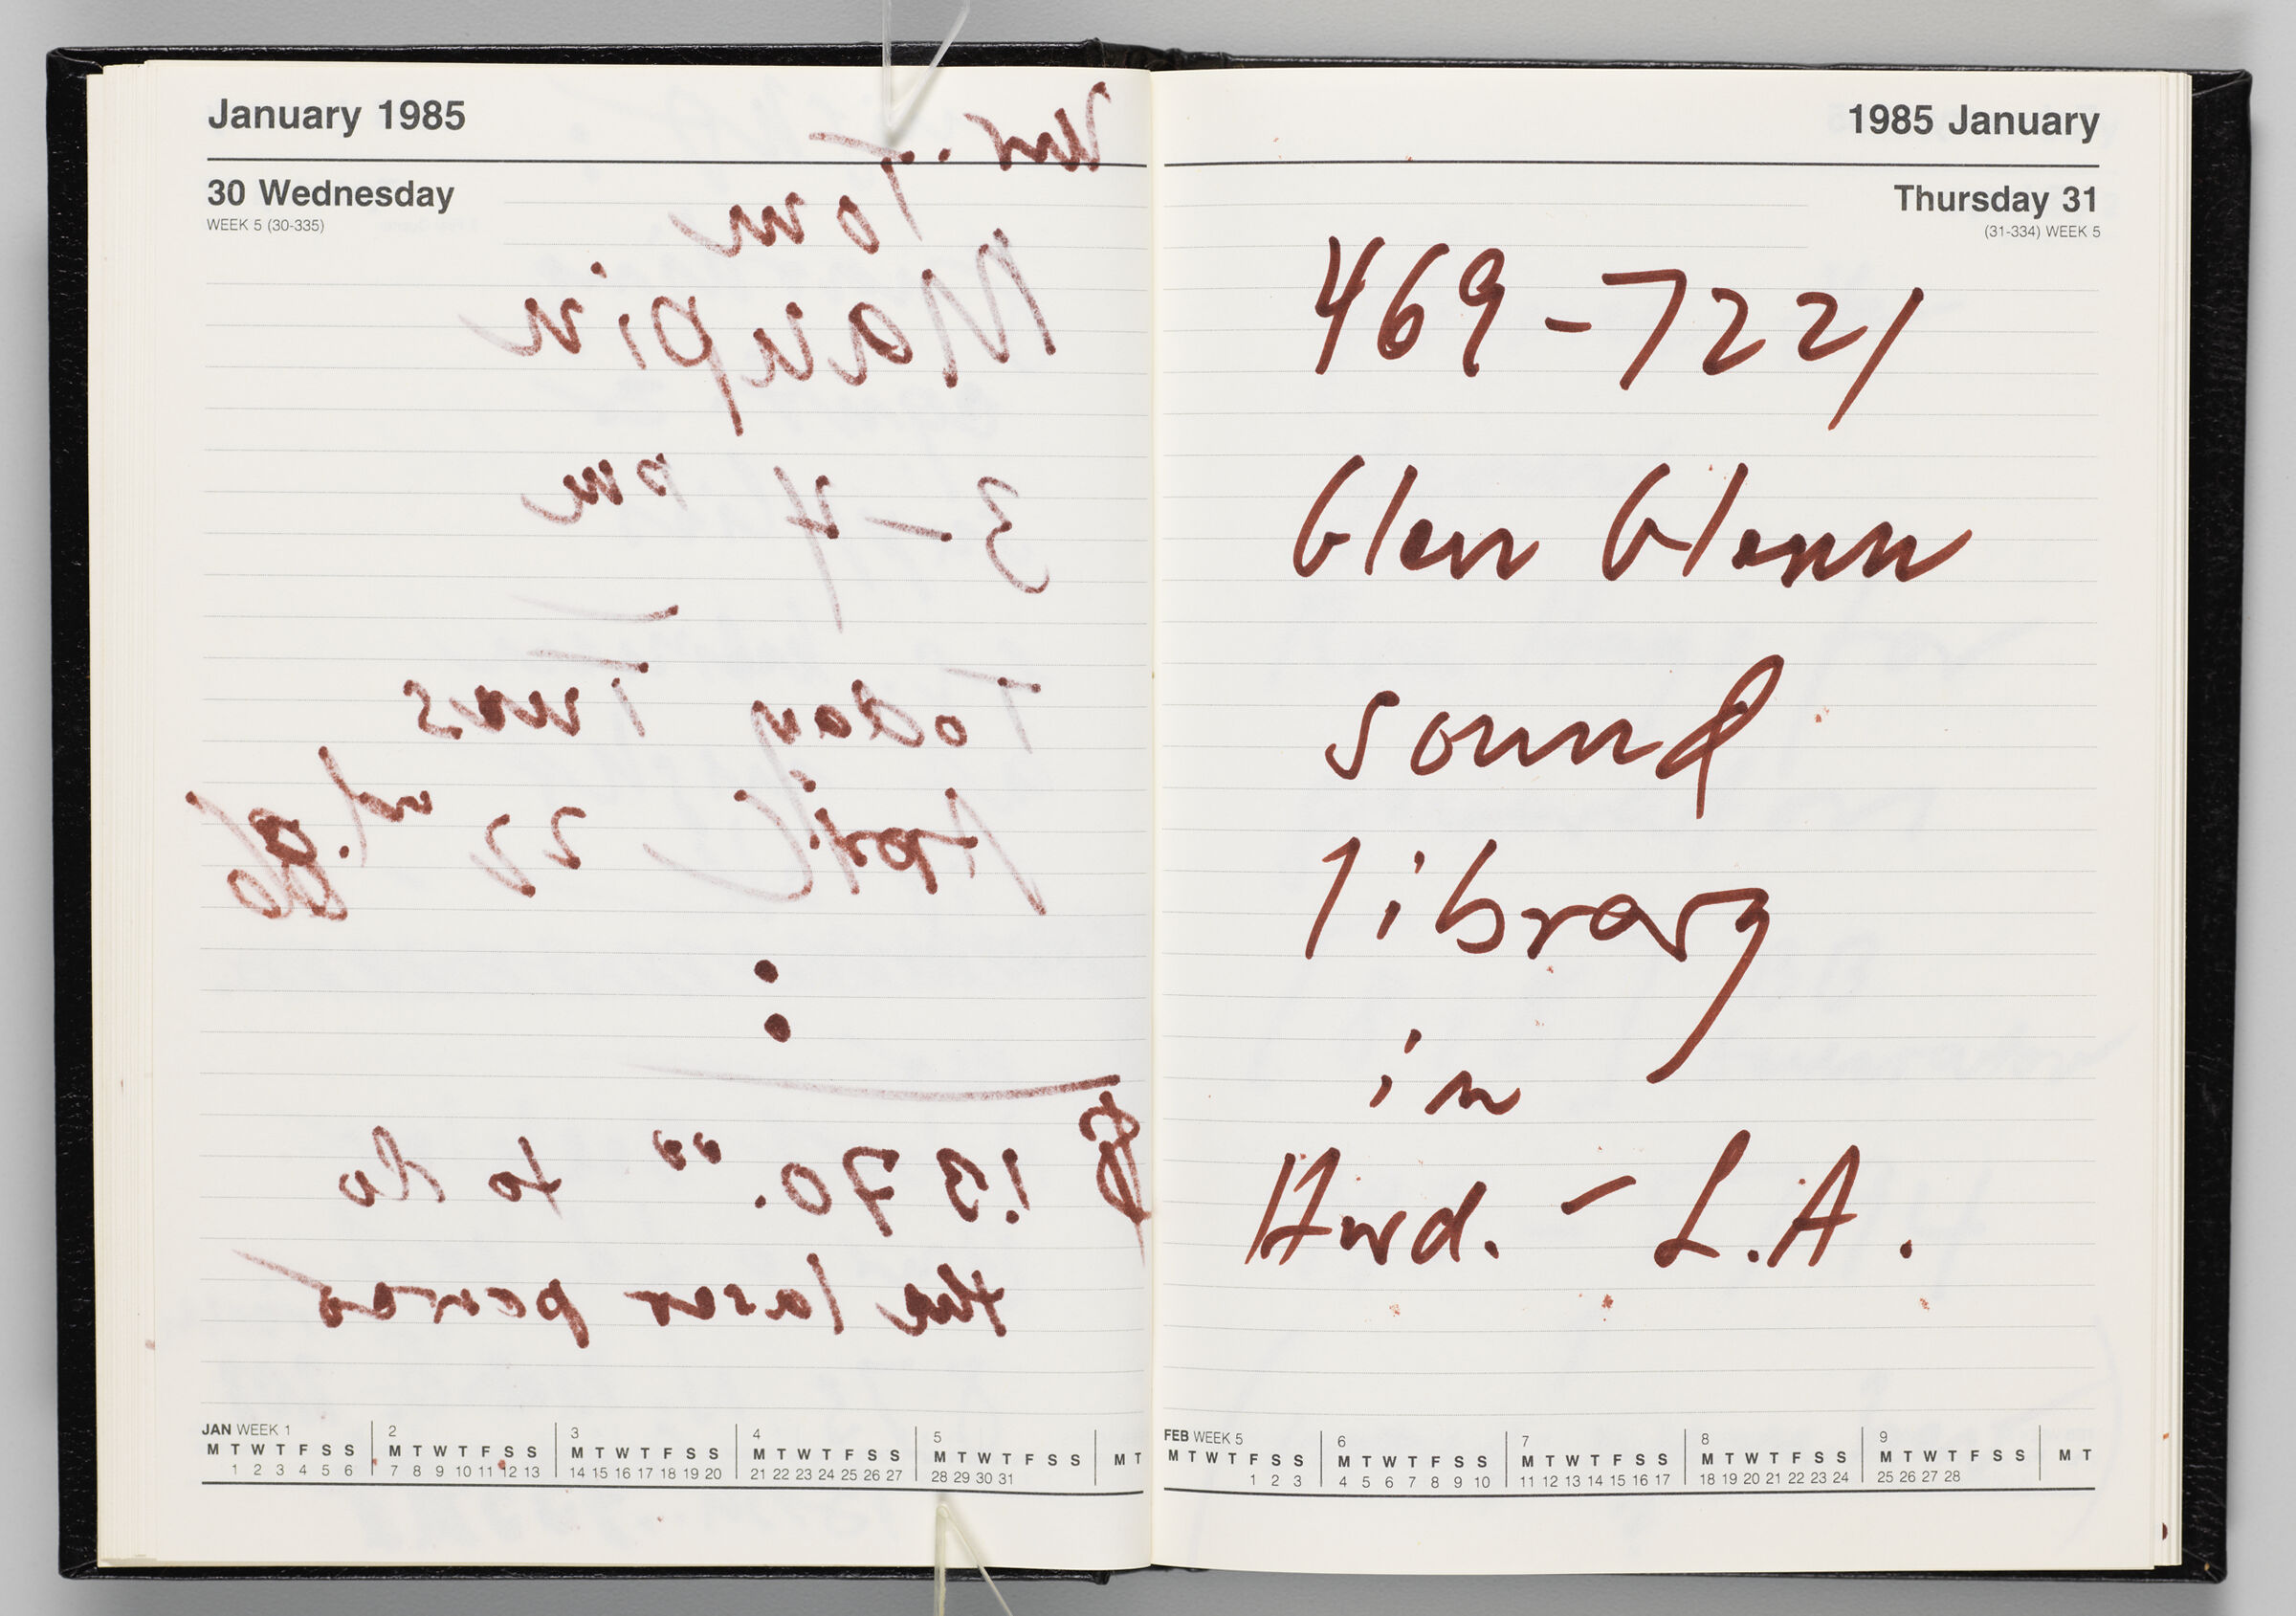 Untitled (Bleed-Through Of Previous Page, Left Page); Untitled (Notes On Calendar Page January 31, 1985, Right Page)